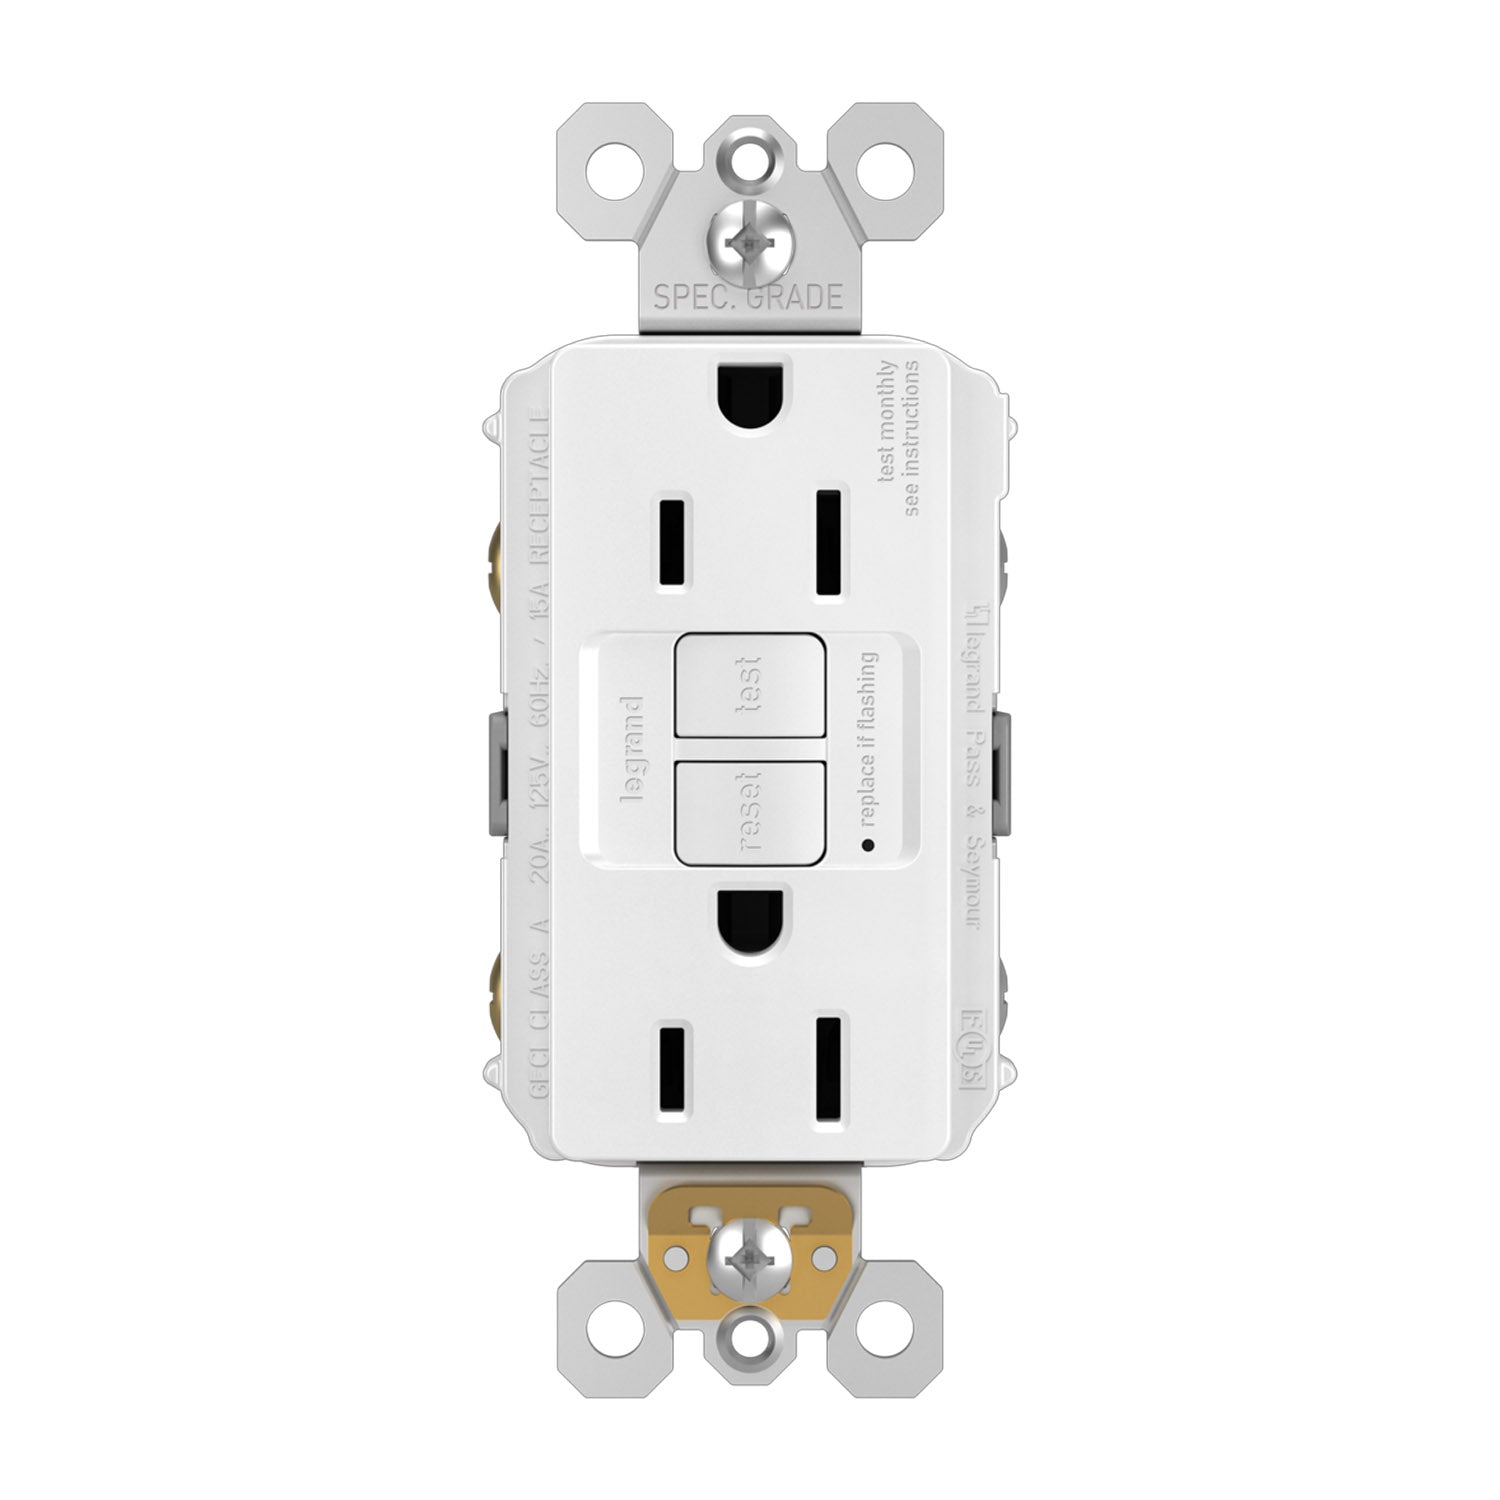 15 Amp vs. 20 Amp Outlets: What's the Difference?